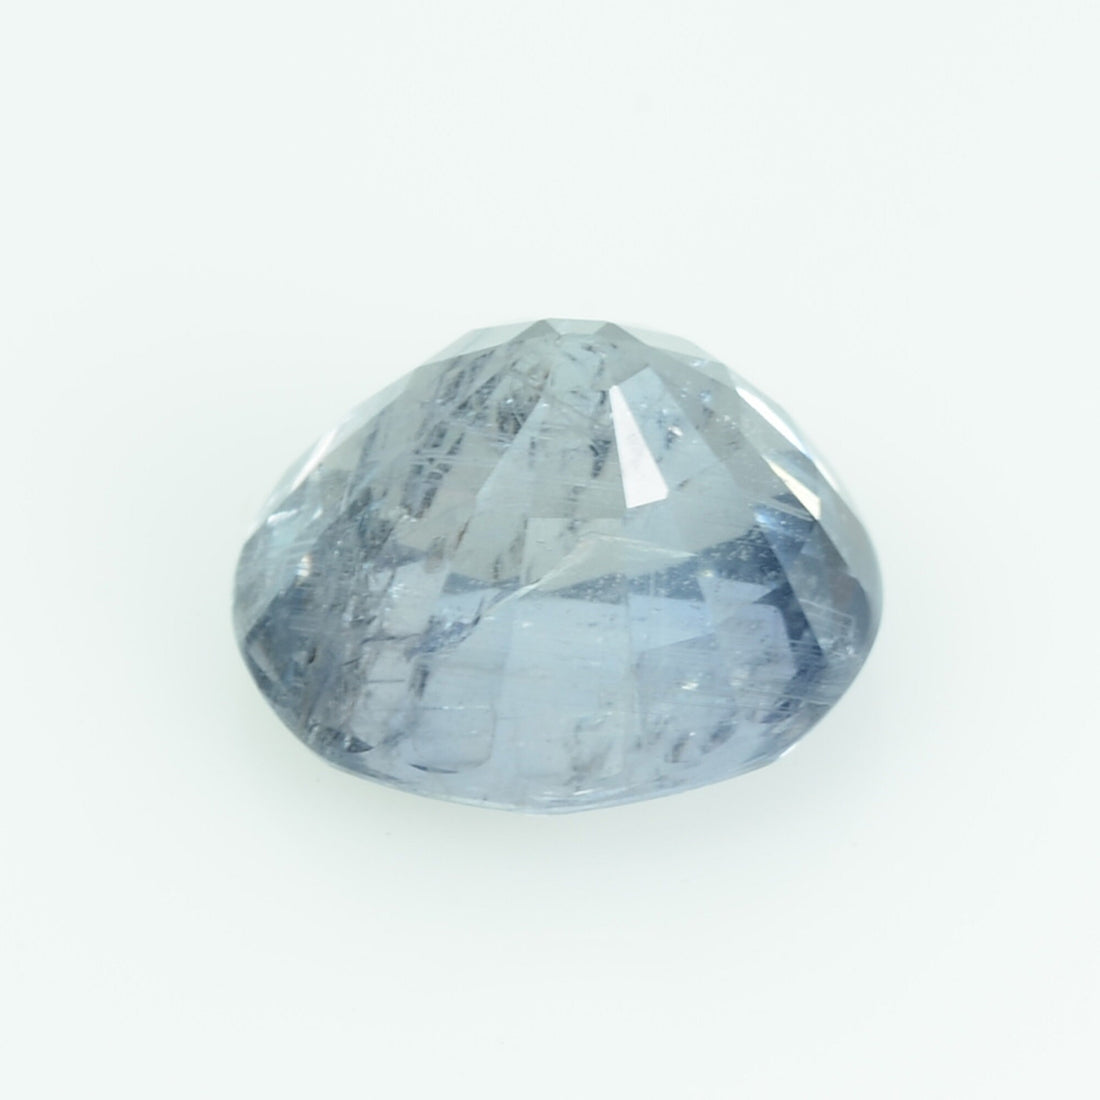 3.44 Cts Natural Fancy Sapphire Loose Gemstone Oval Cut